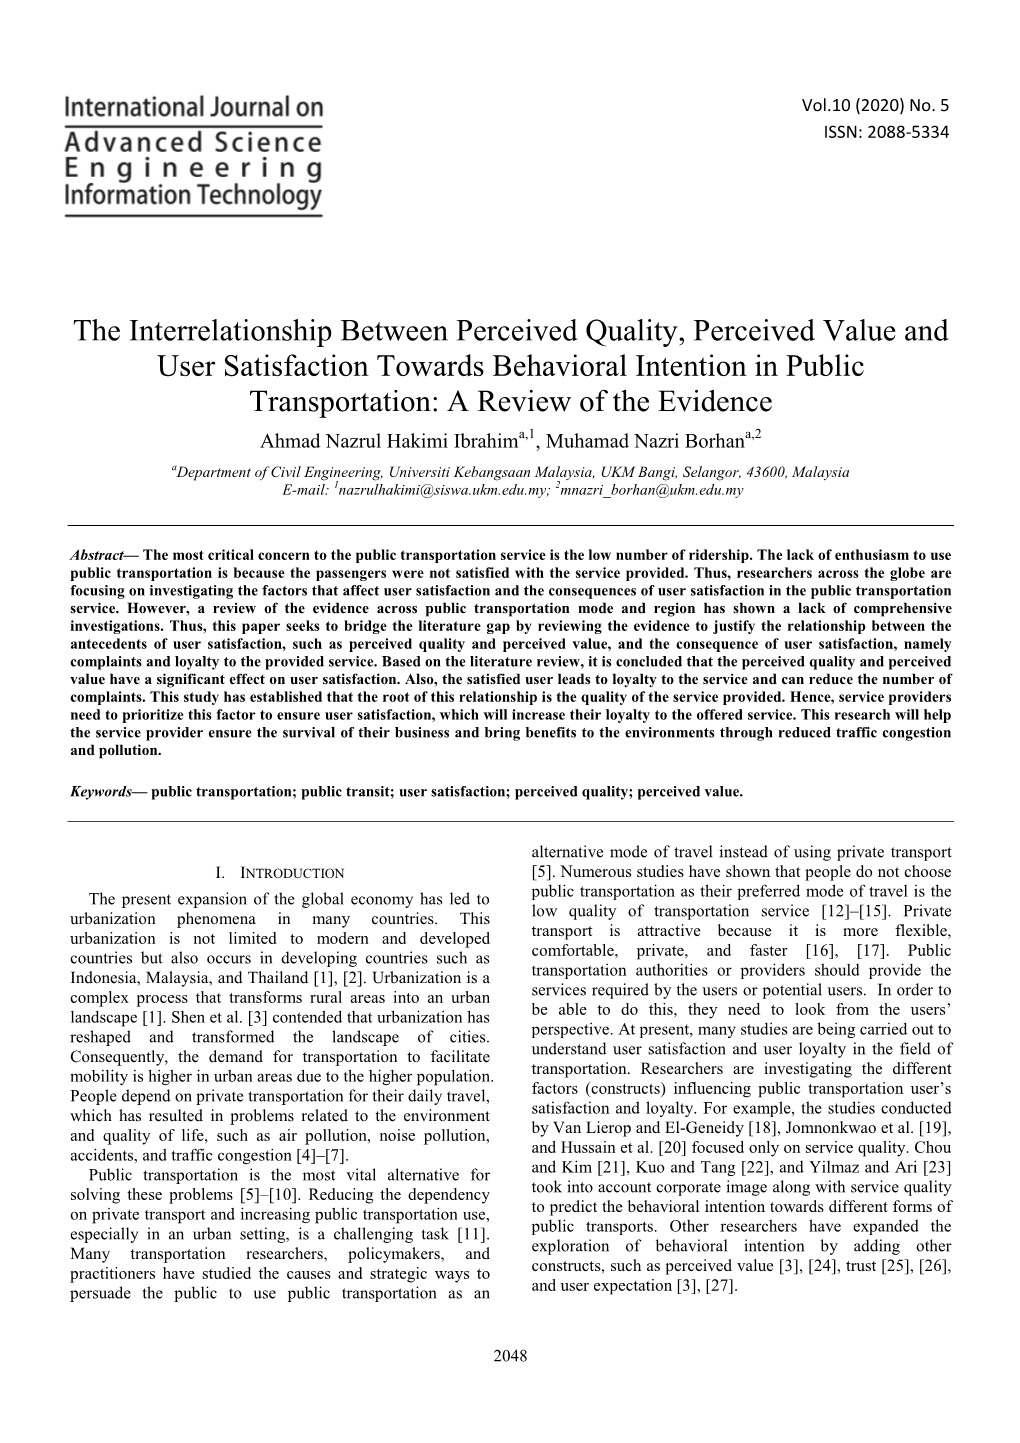 The Interrelationship Between Perceived Quality, Perceived Value